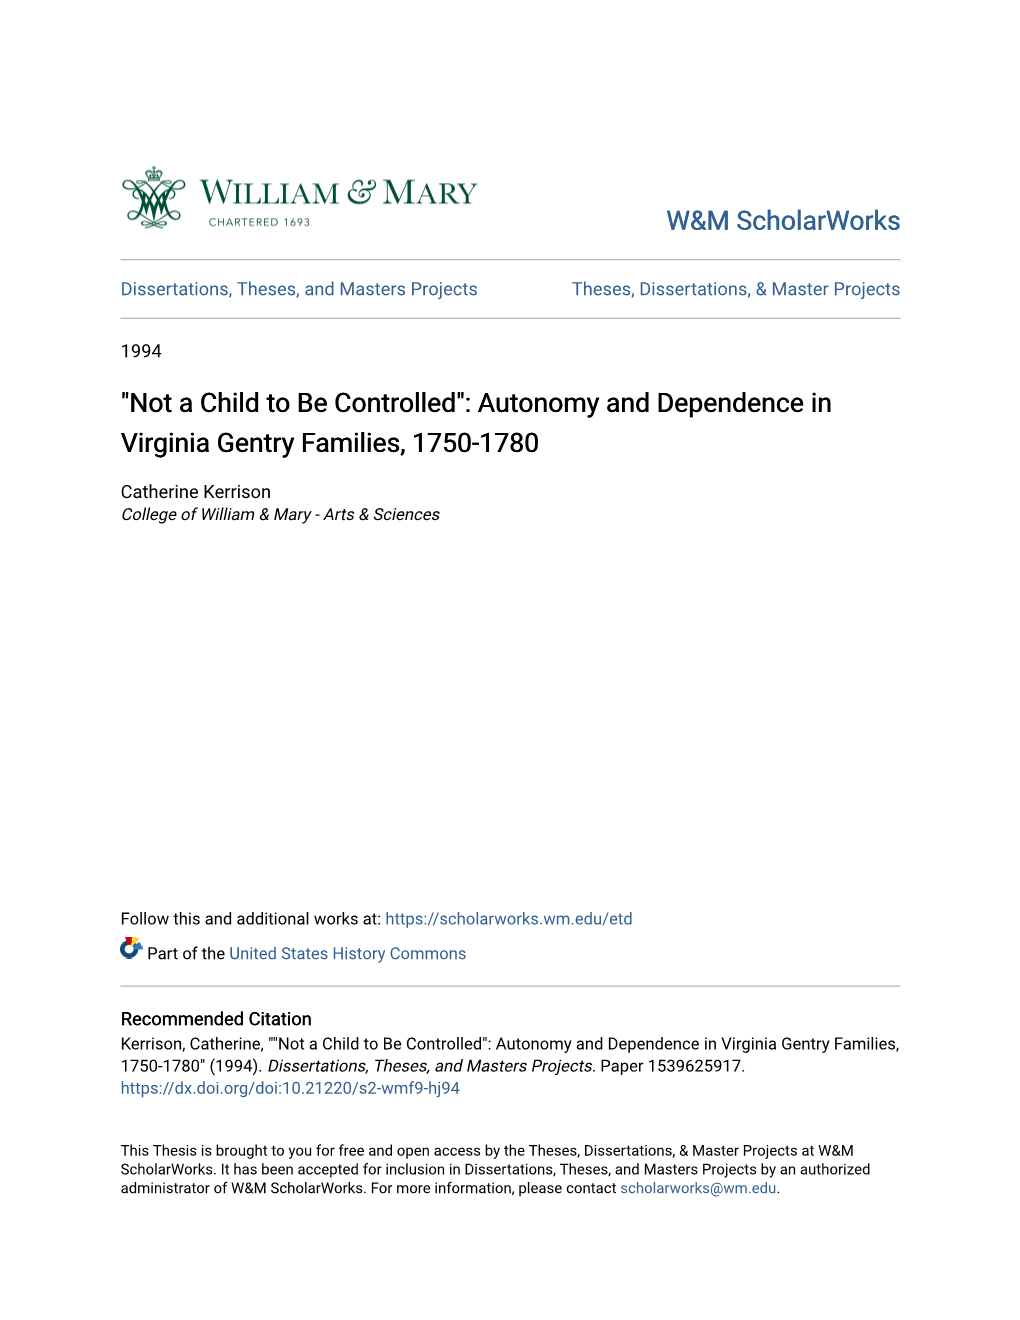 Autonomy and Dependence in Virginia Gentry Families, 1750-1780